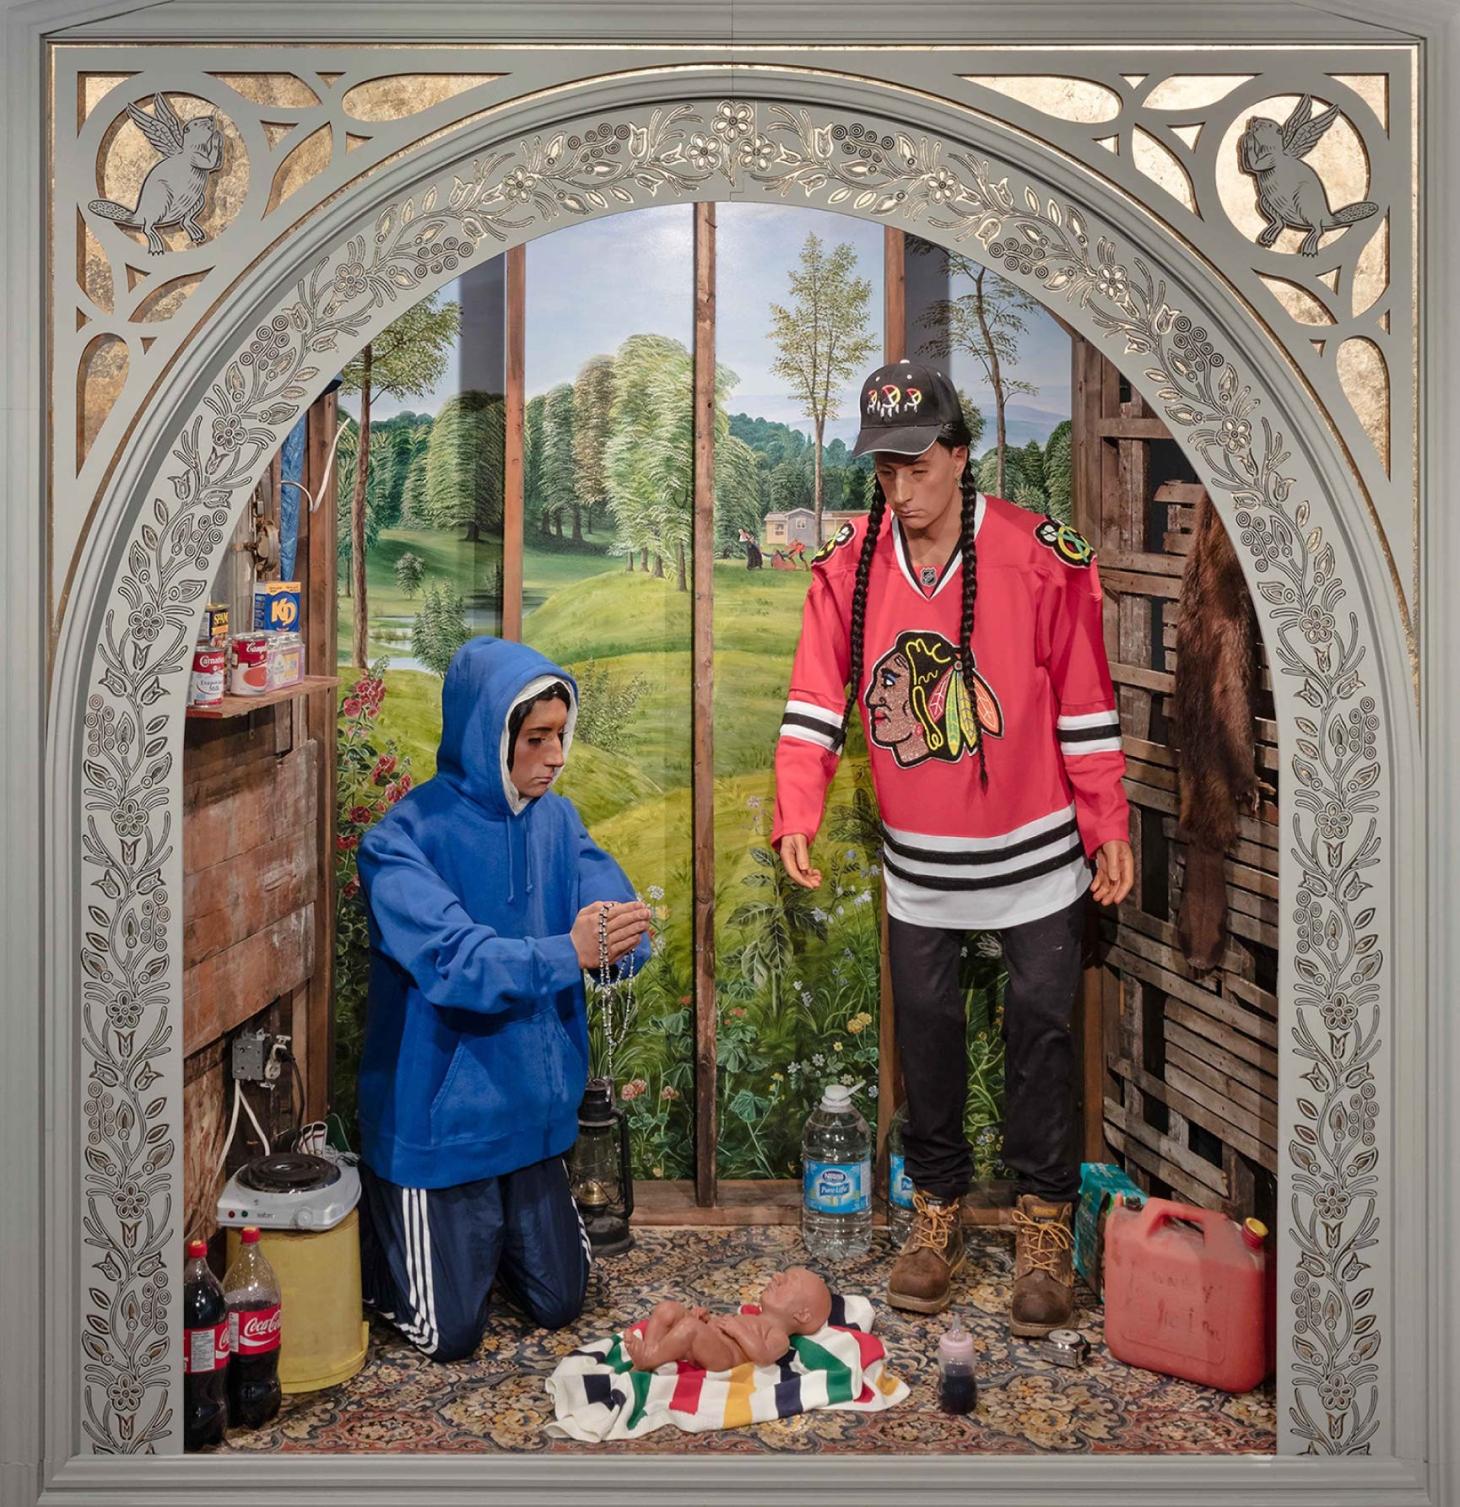 Nativity Scene. By Kent Monkman, 2017. Mixed Media Installation. Collection of Museum London, gift of the Volunteer Committee (1956–2017).